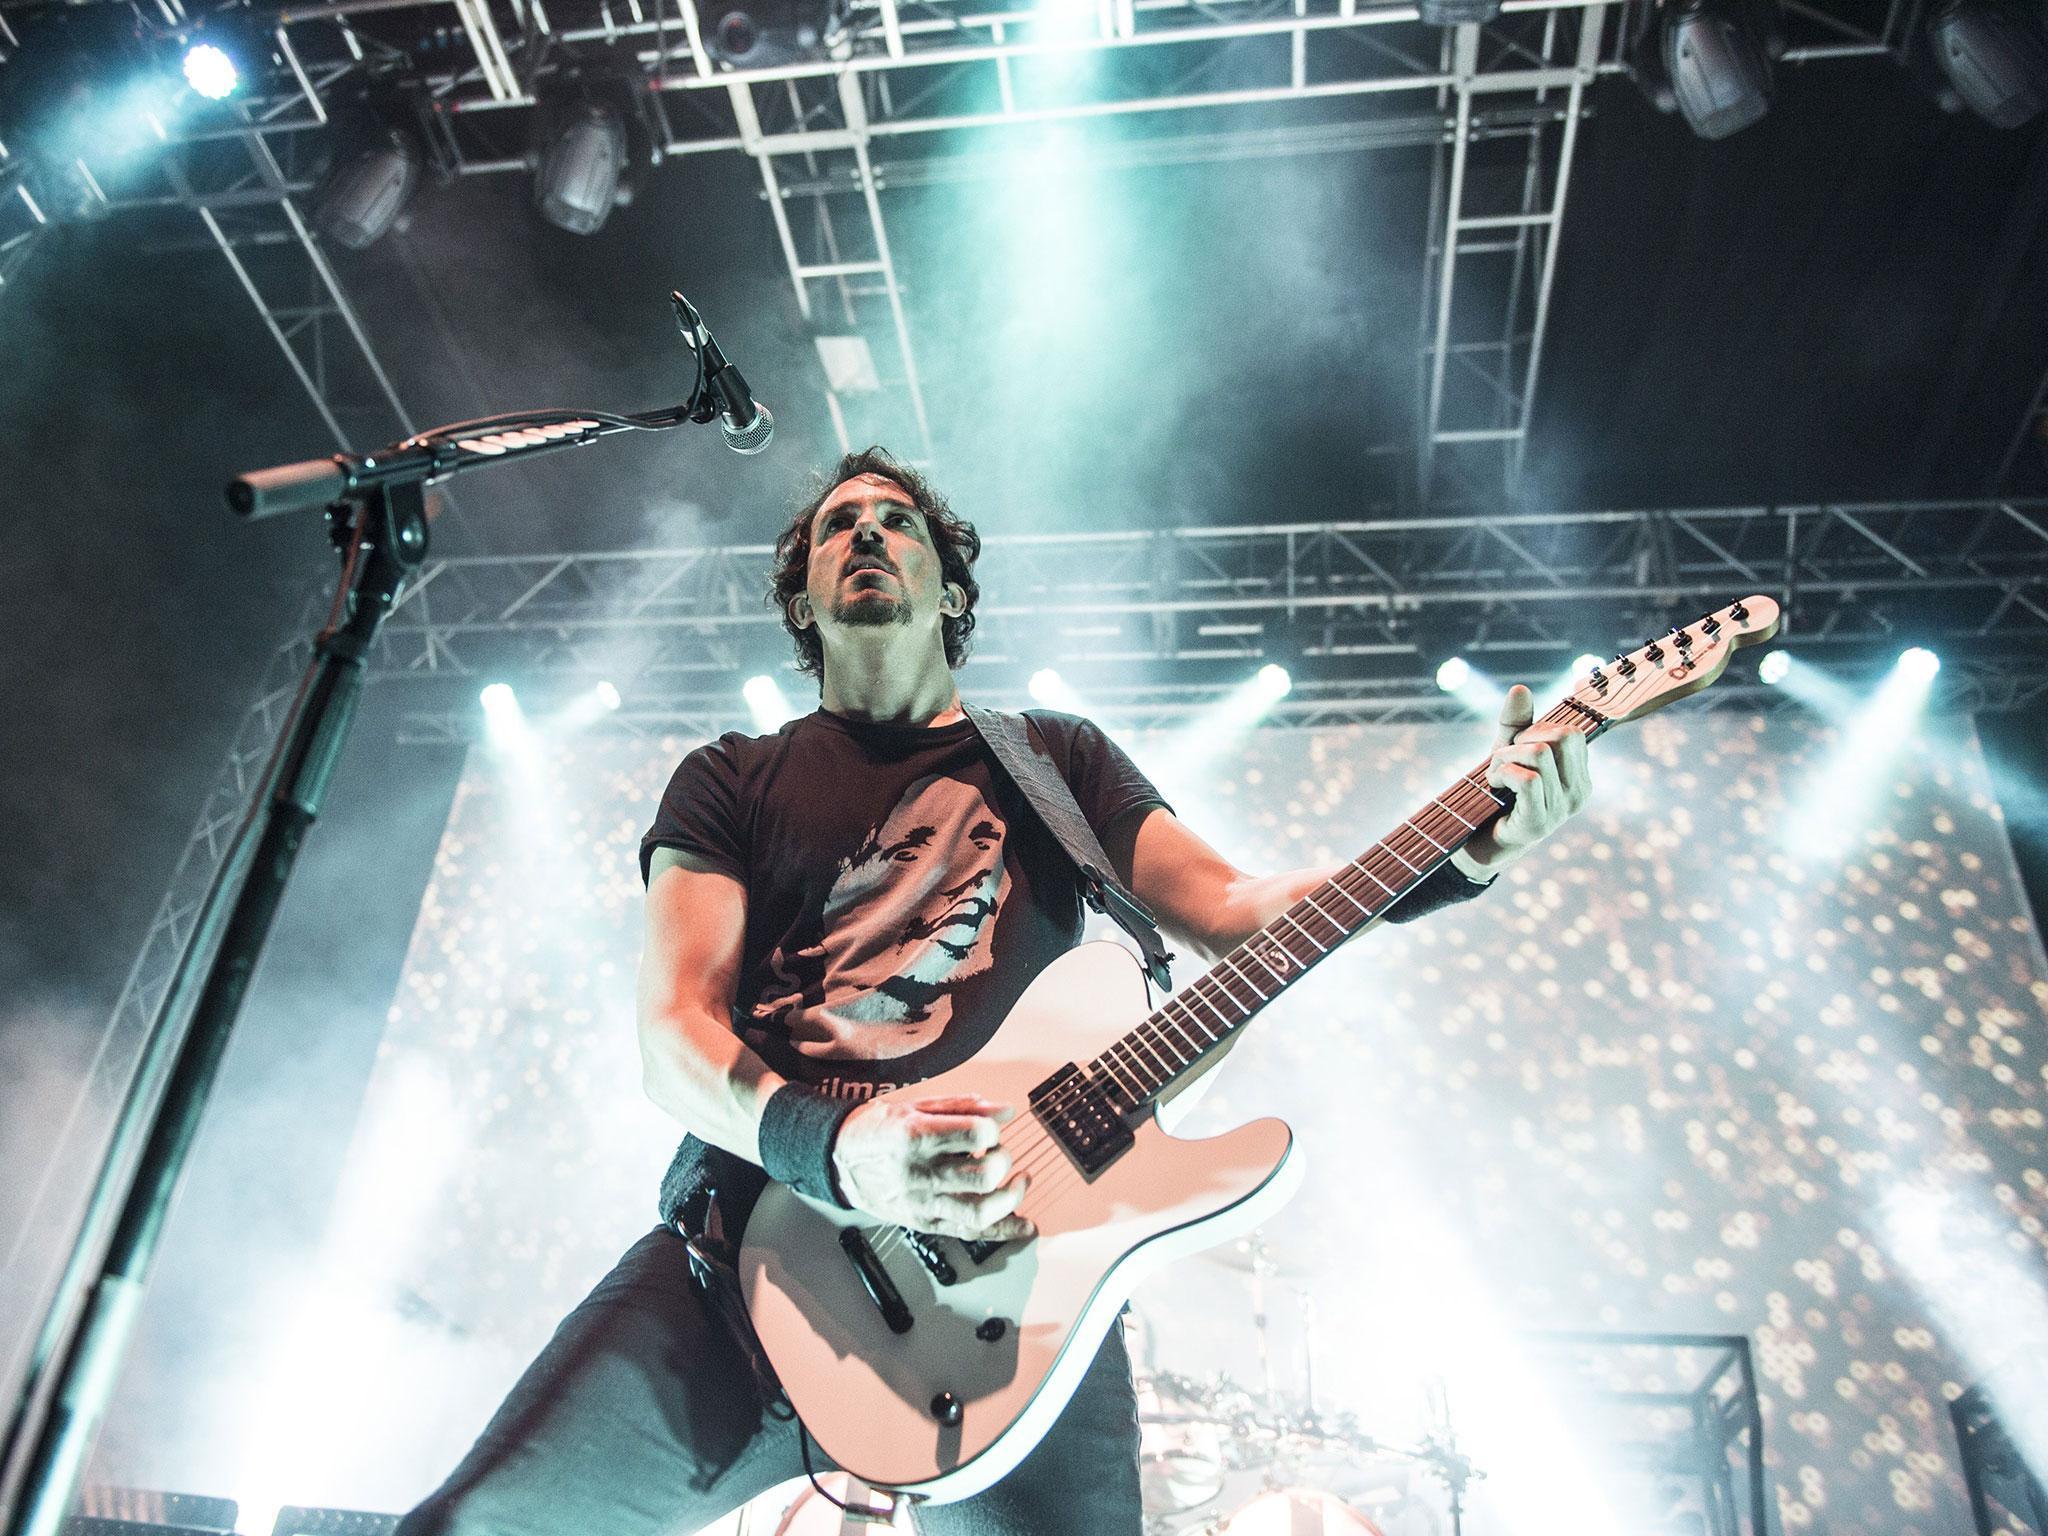 Gojira frontman Joe Duplantier and his band gave the audience a brand of metal taken to a higher plane of existence